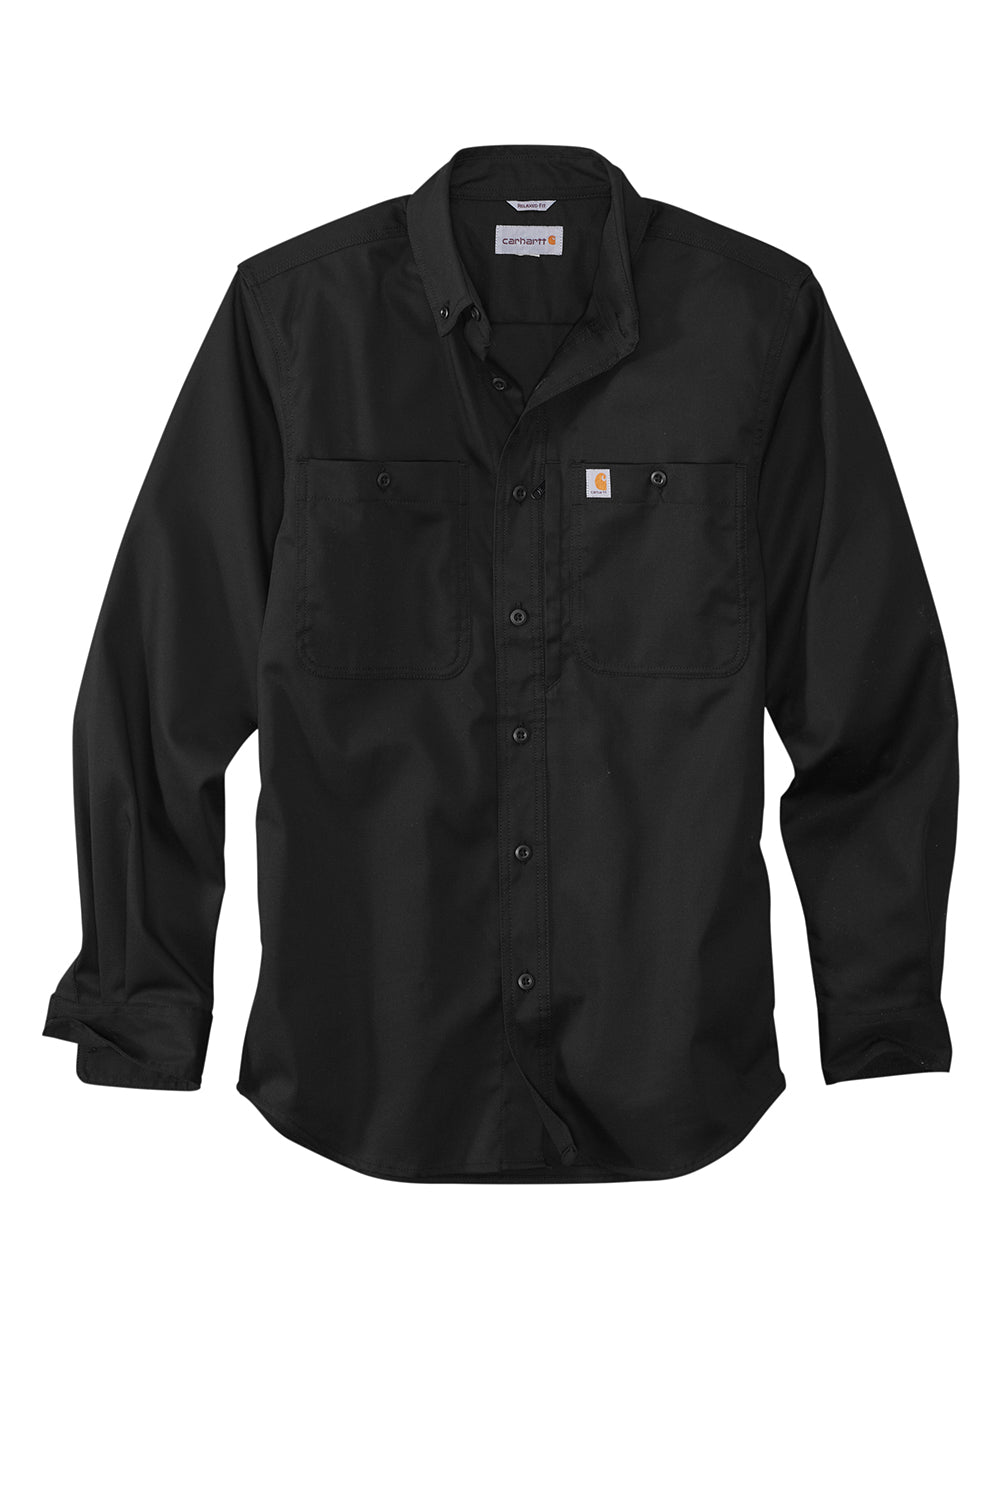 Carhartt CT102538 Mens Rugged Professional Series Wrinkle Resistant Long Sleeve Button Down Shirt w/ Pocket Black Flat Front